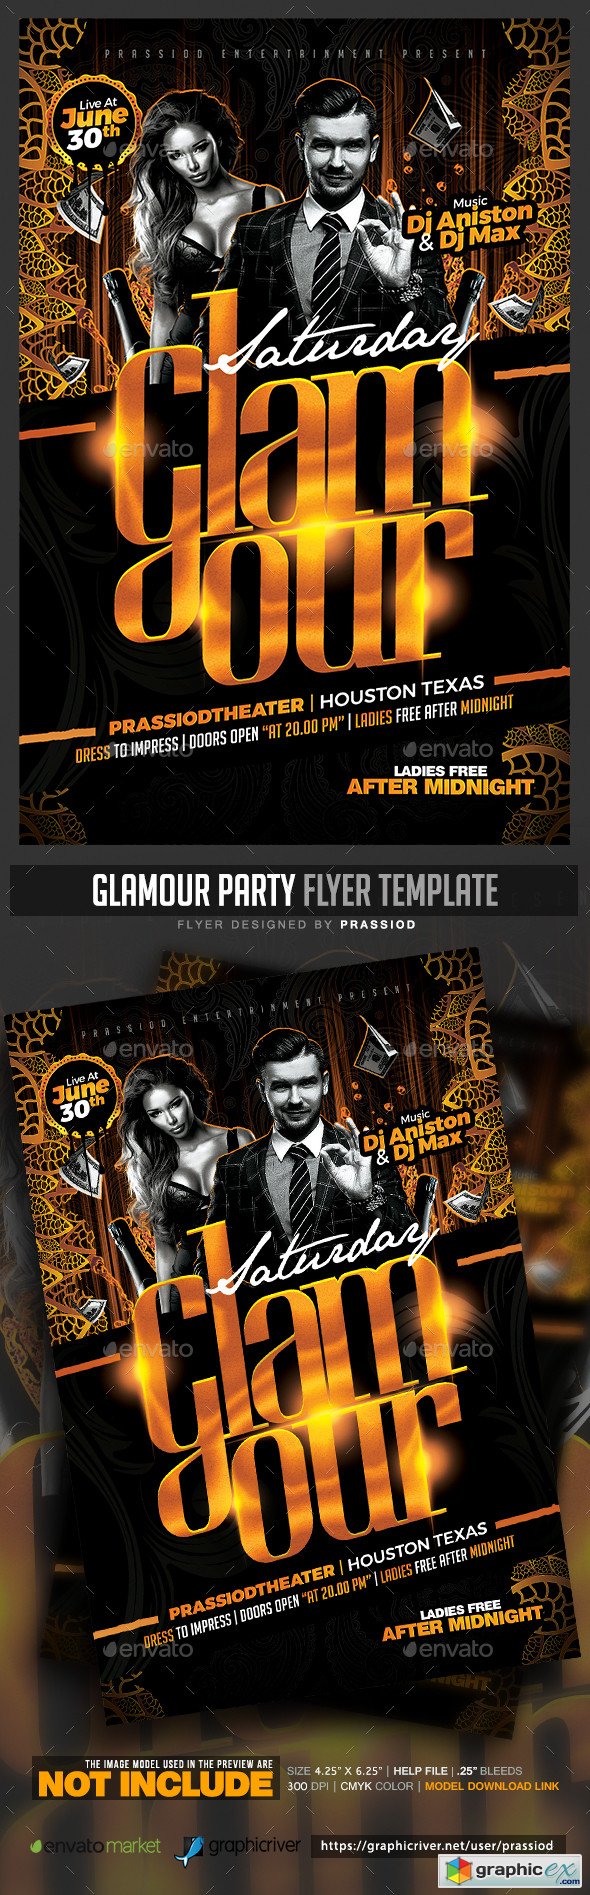 Glamour Party Flyer Template 20371798